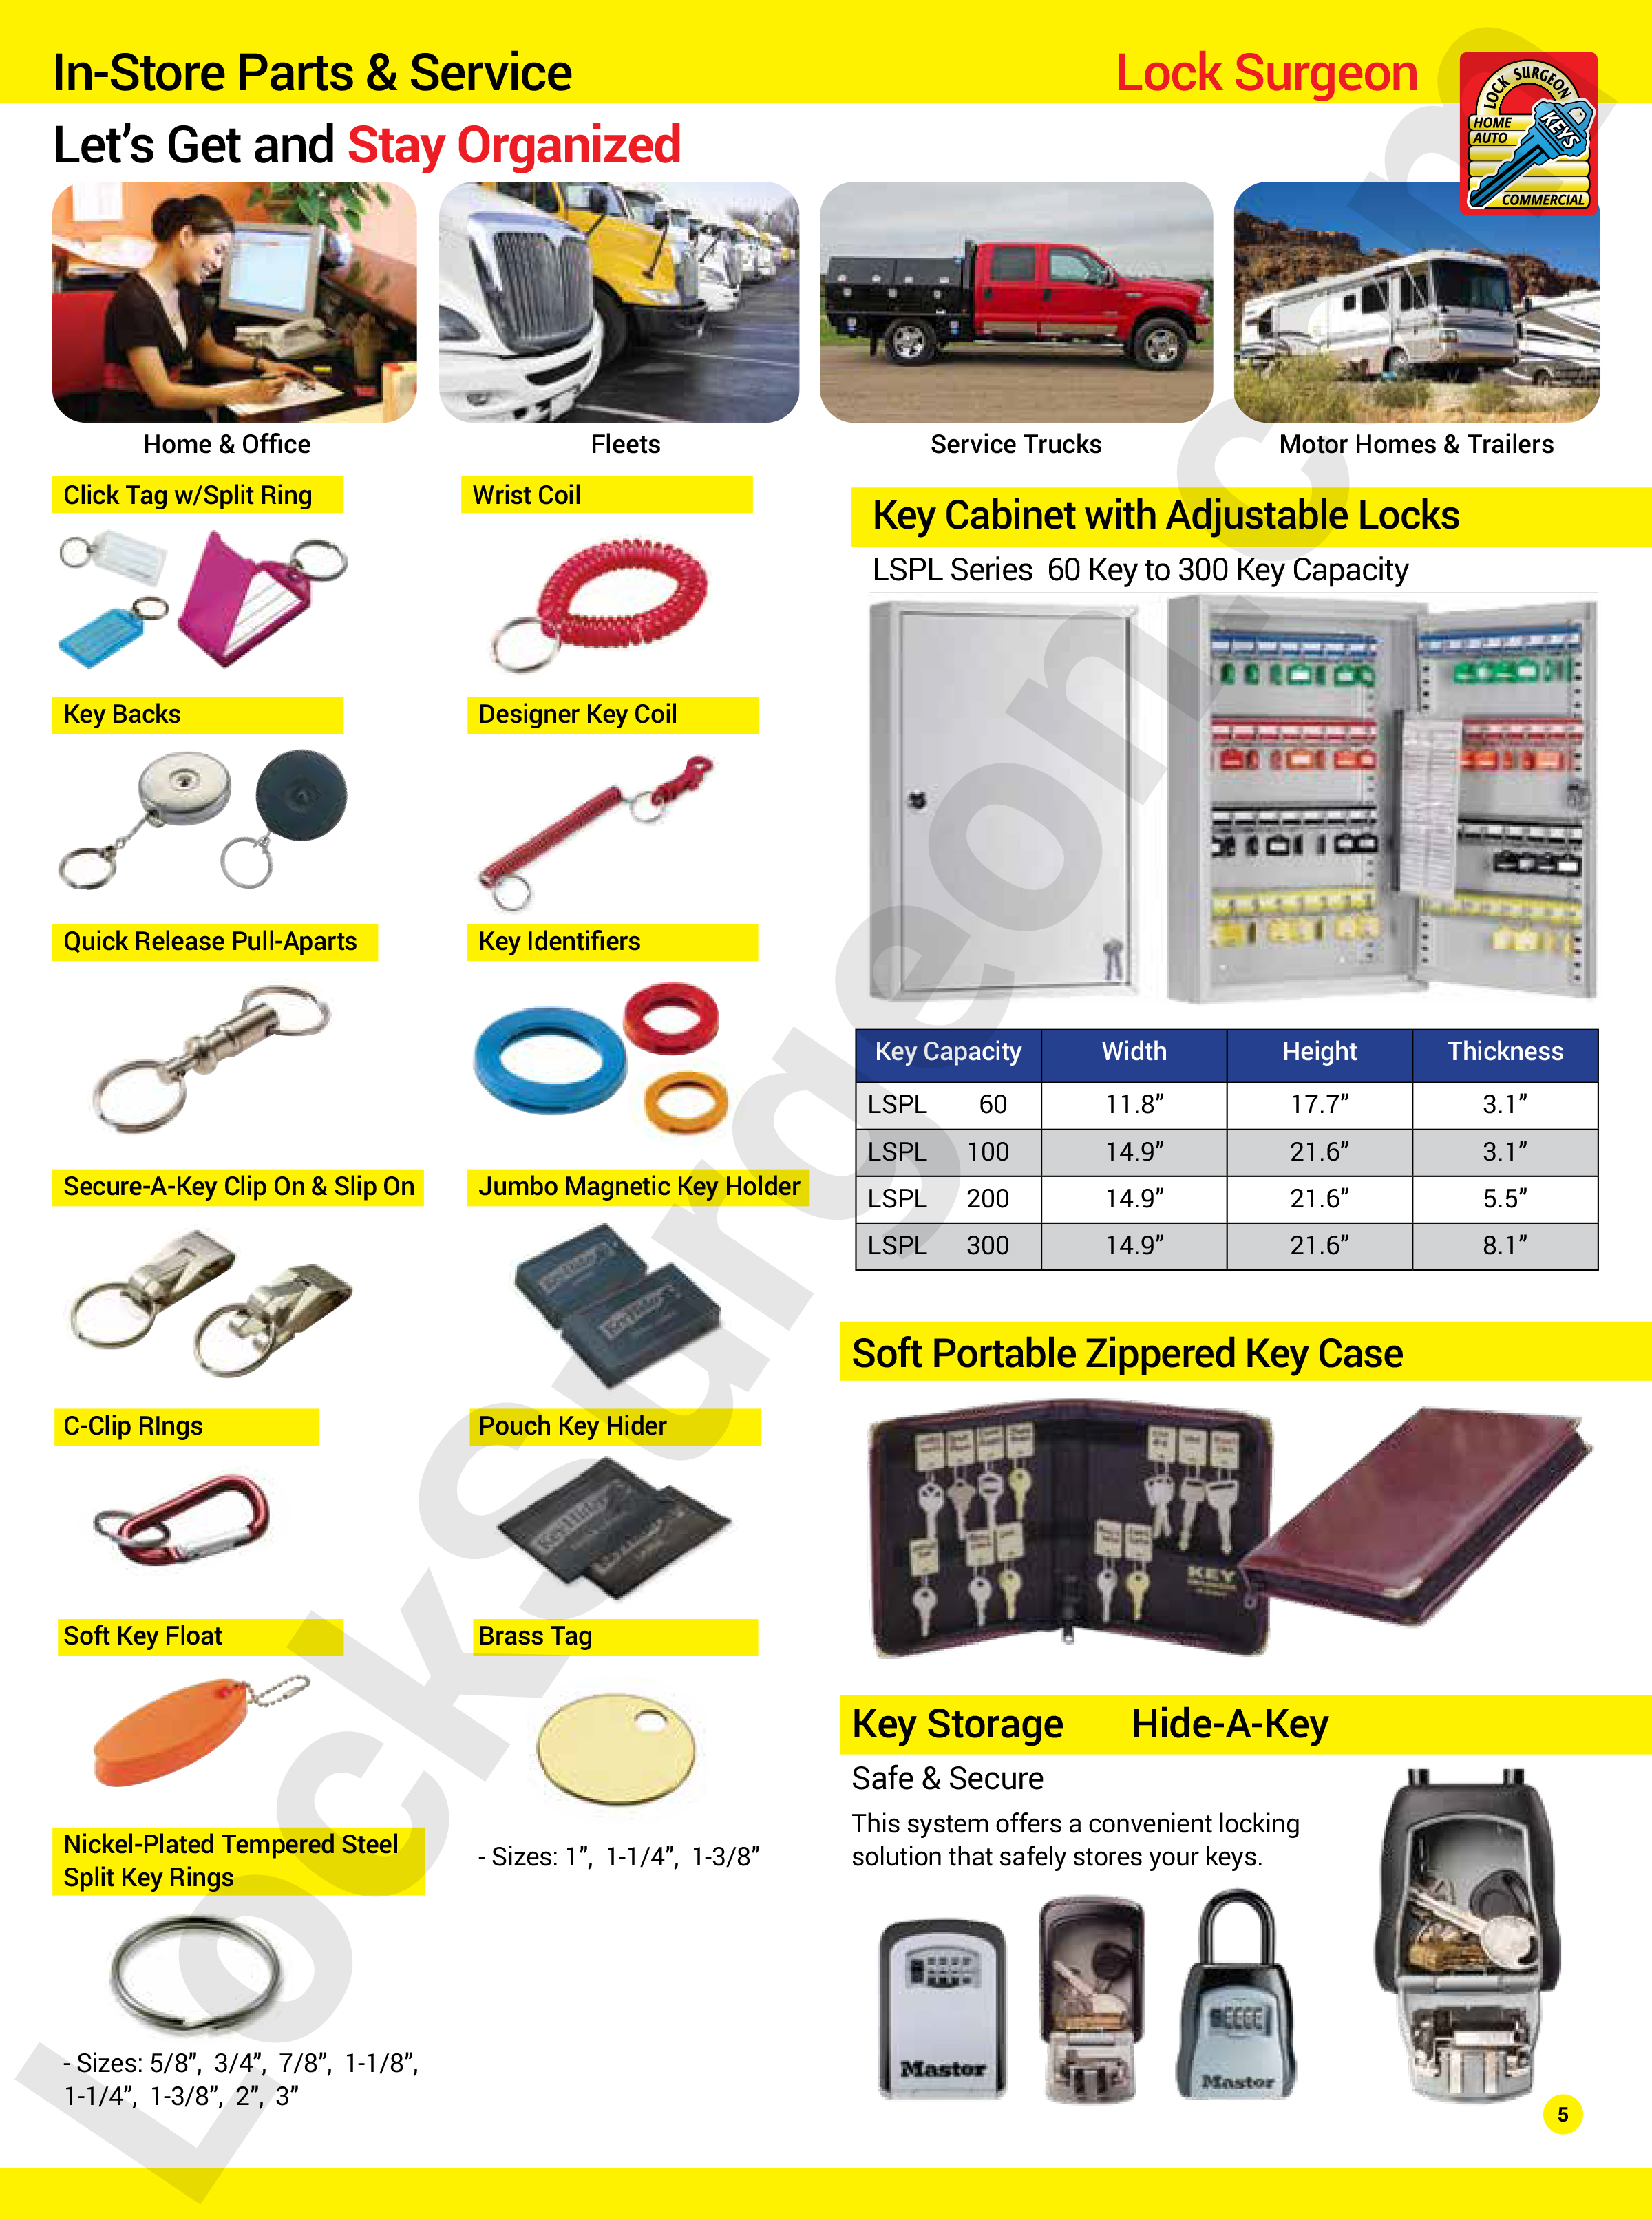 Keep home, office, fleets, service trucks, RVs and trailer keys organized and easy to find.